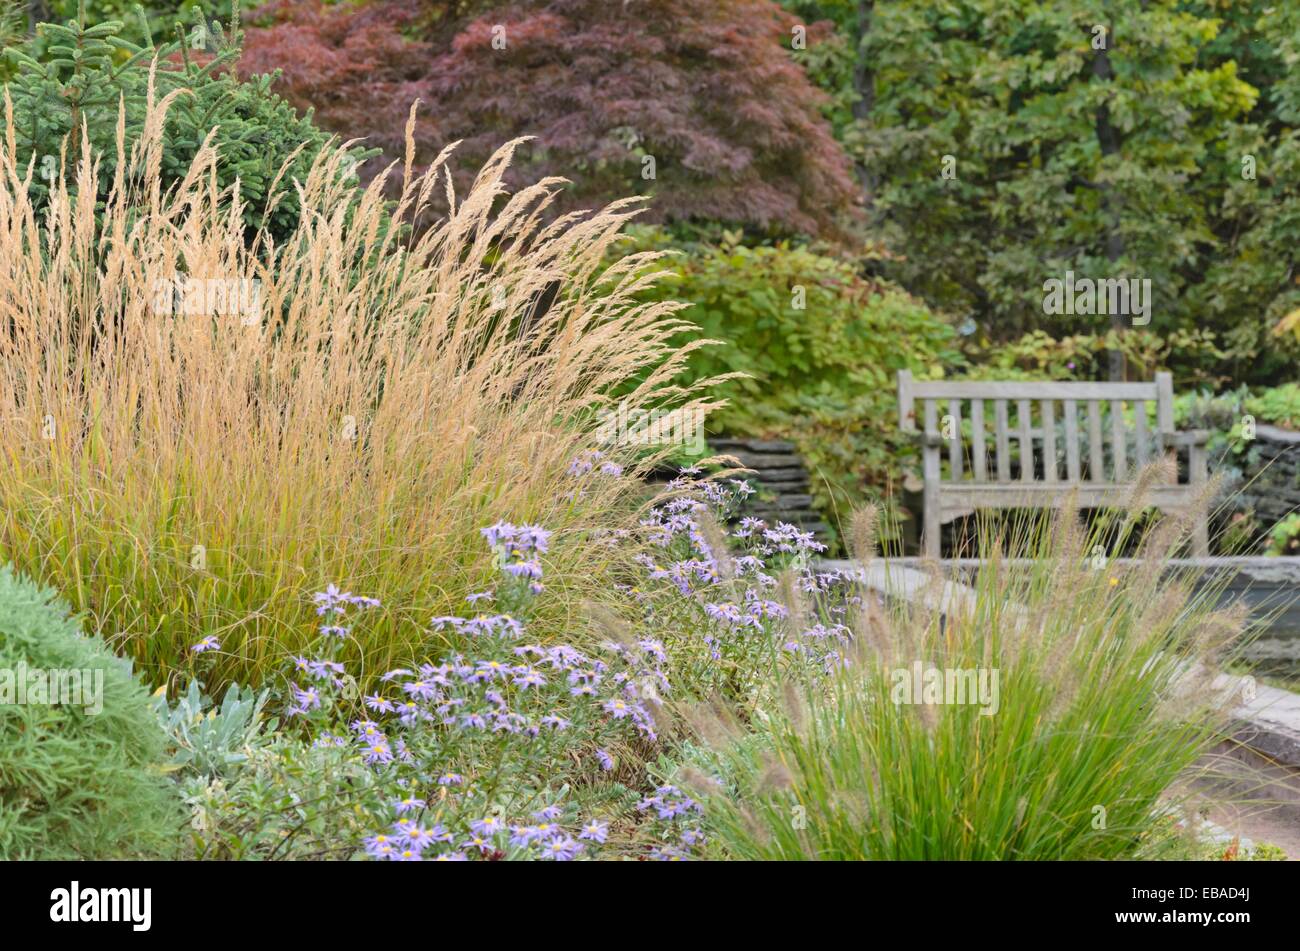 Reed grass (Calamagrostis x acutiflora 'Karl Foerster'), asters (Aster) and dwarf fountain grass (Pennisetum alopecuroides) Stock Photo